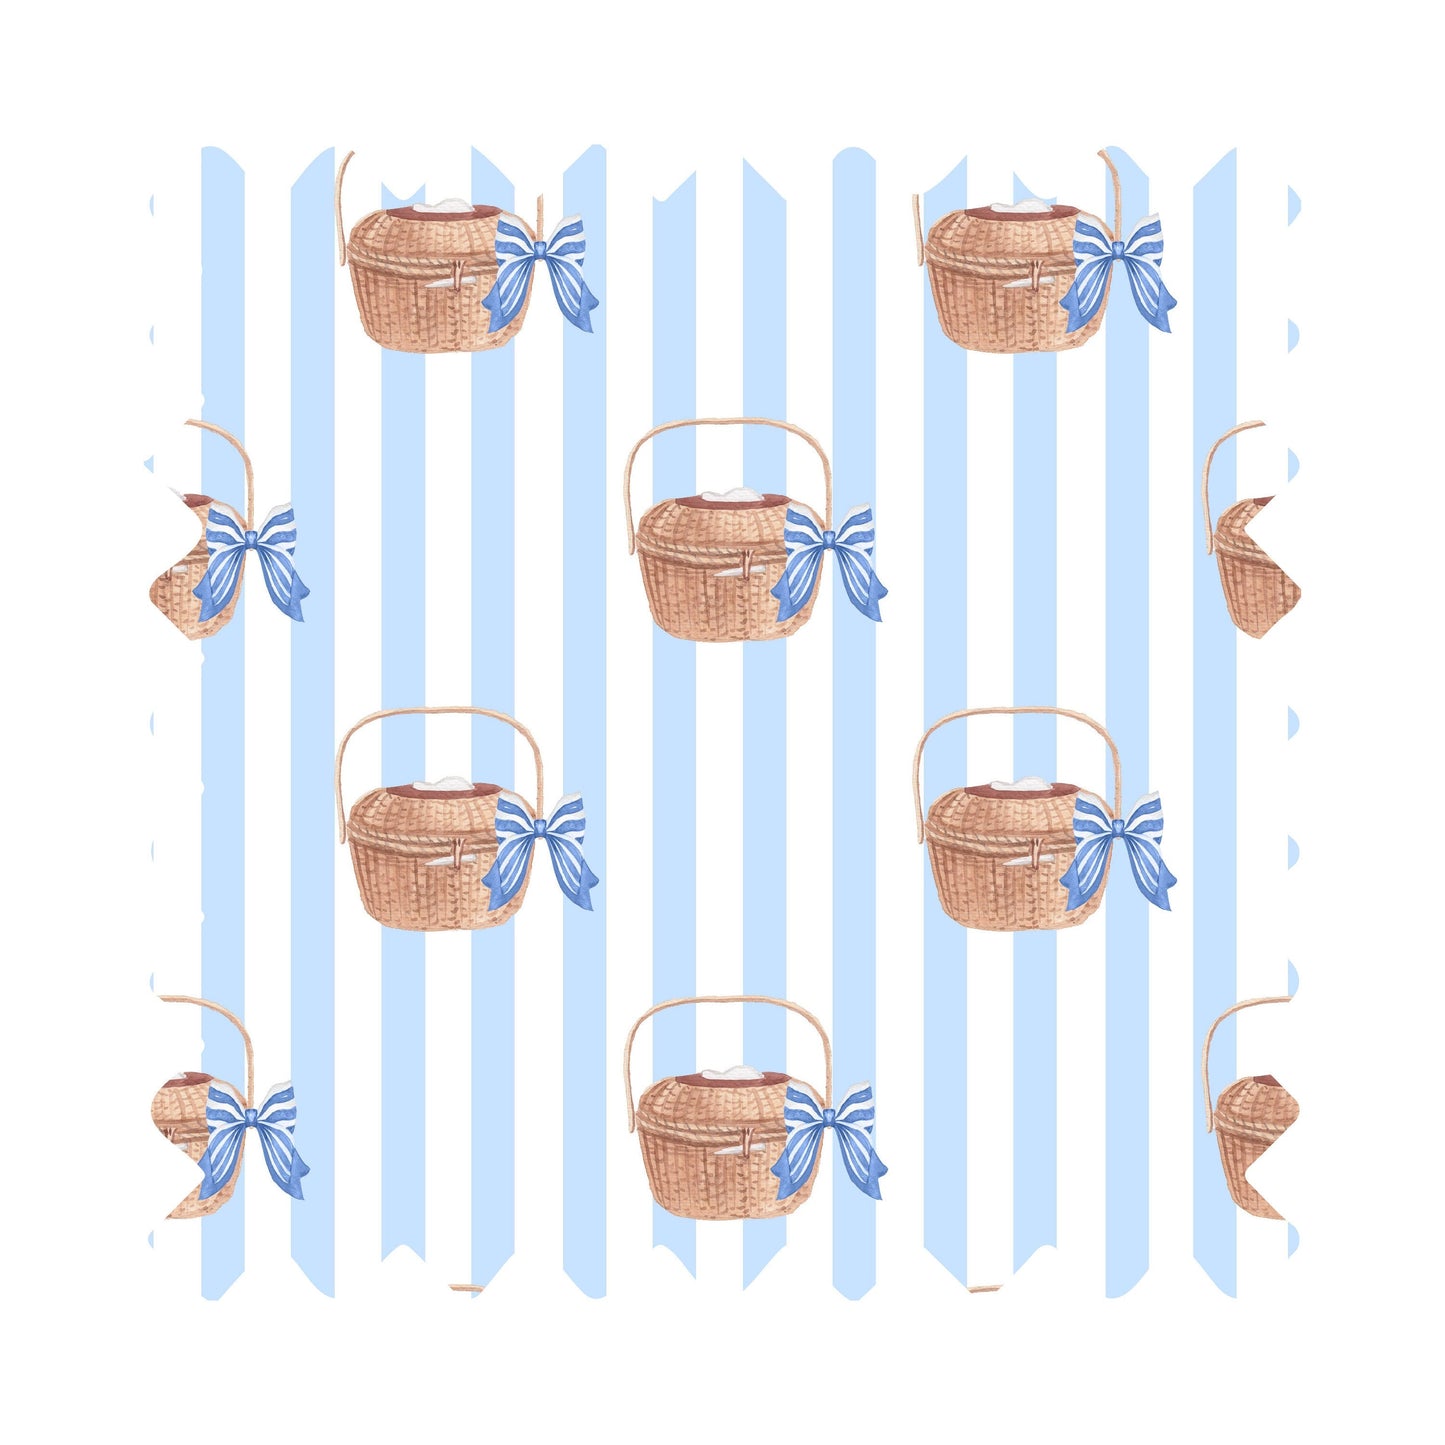 Nantucket Basket Luxury Gift Wrap - Available in 2 Colors